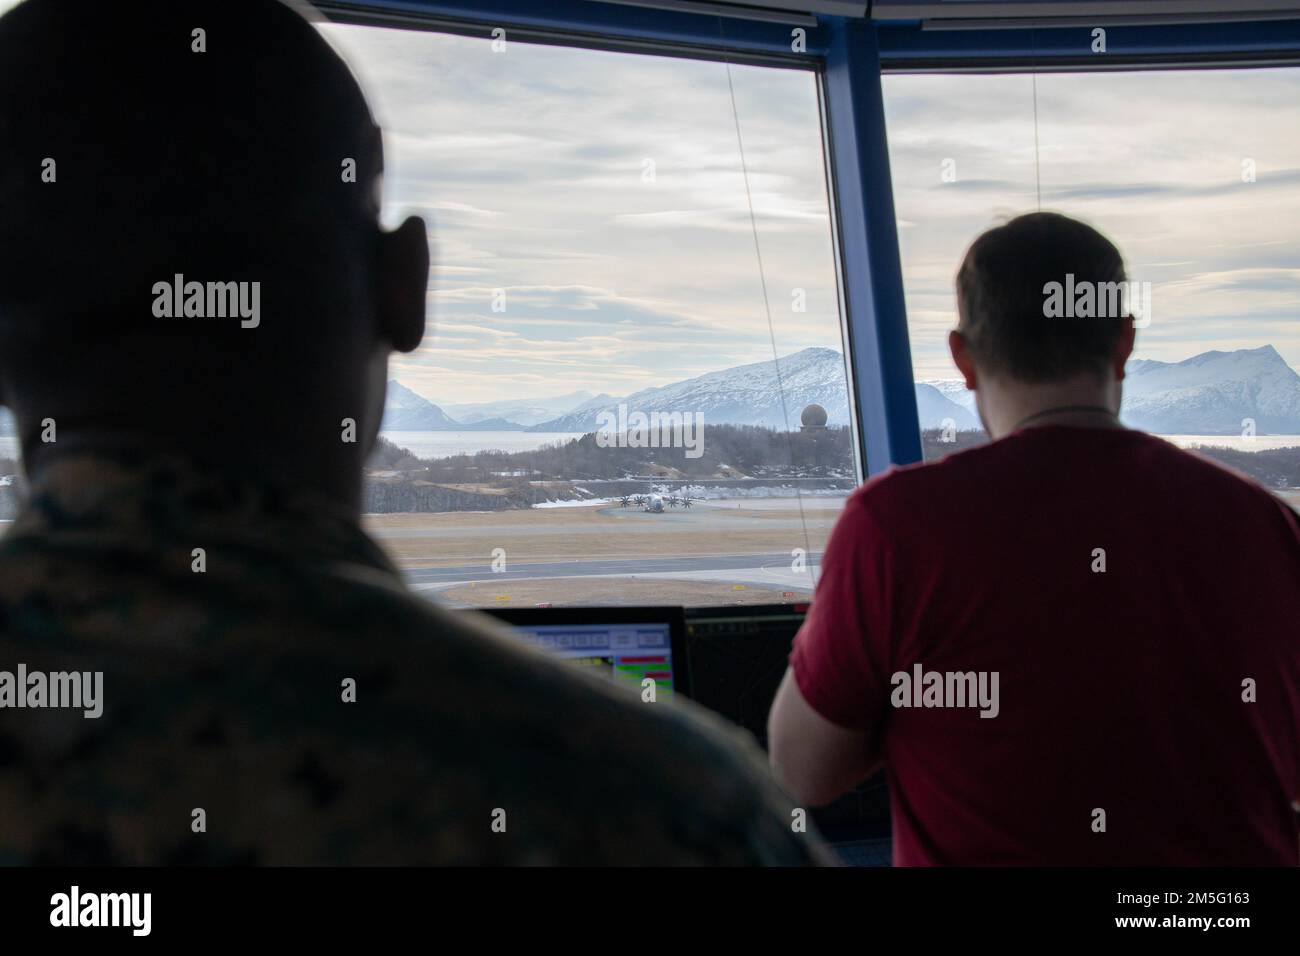 U.S. Marine Corps Sgt. Joshua Villegas (left) and Arnt-Einar Nilsen observe as a German Airbus A400M Atlas taxis on the runway during Exercise Cold Response 2022, Bodø, Norway, March 16, 2022. Villegas is an air traffic controller assigned to Marine Air Control Squadron 2, 2d Marine Aircraft Wing and Nilsen is a Norwegian civilian air traffic controller at Bodø Air Station. Exercise Cold Response '22 is a biennial Norwegian national readiness and defense exercise that takes place across Norway, with participation from each of its military services, as well as from 26 additional North Atlantic Stock Photo